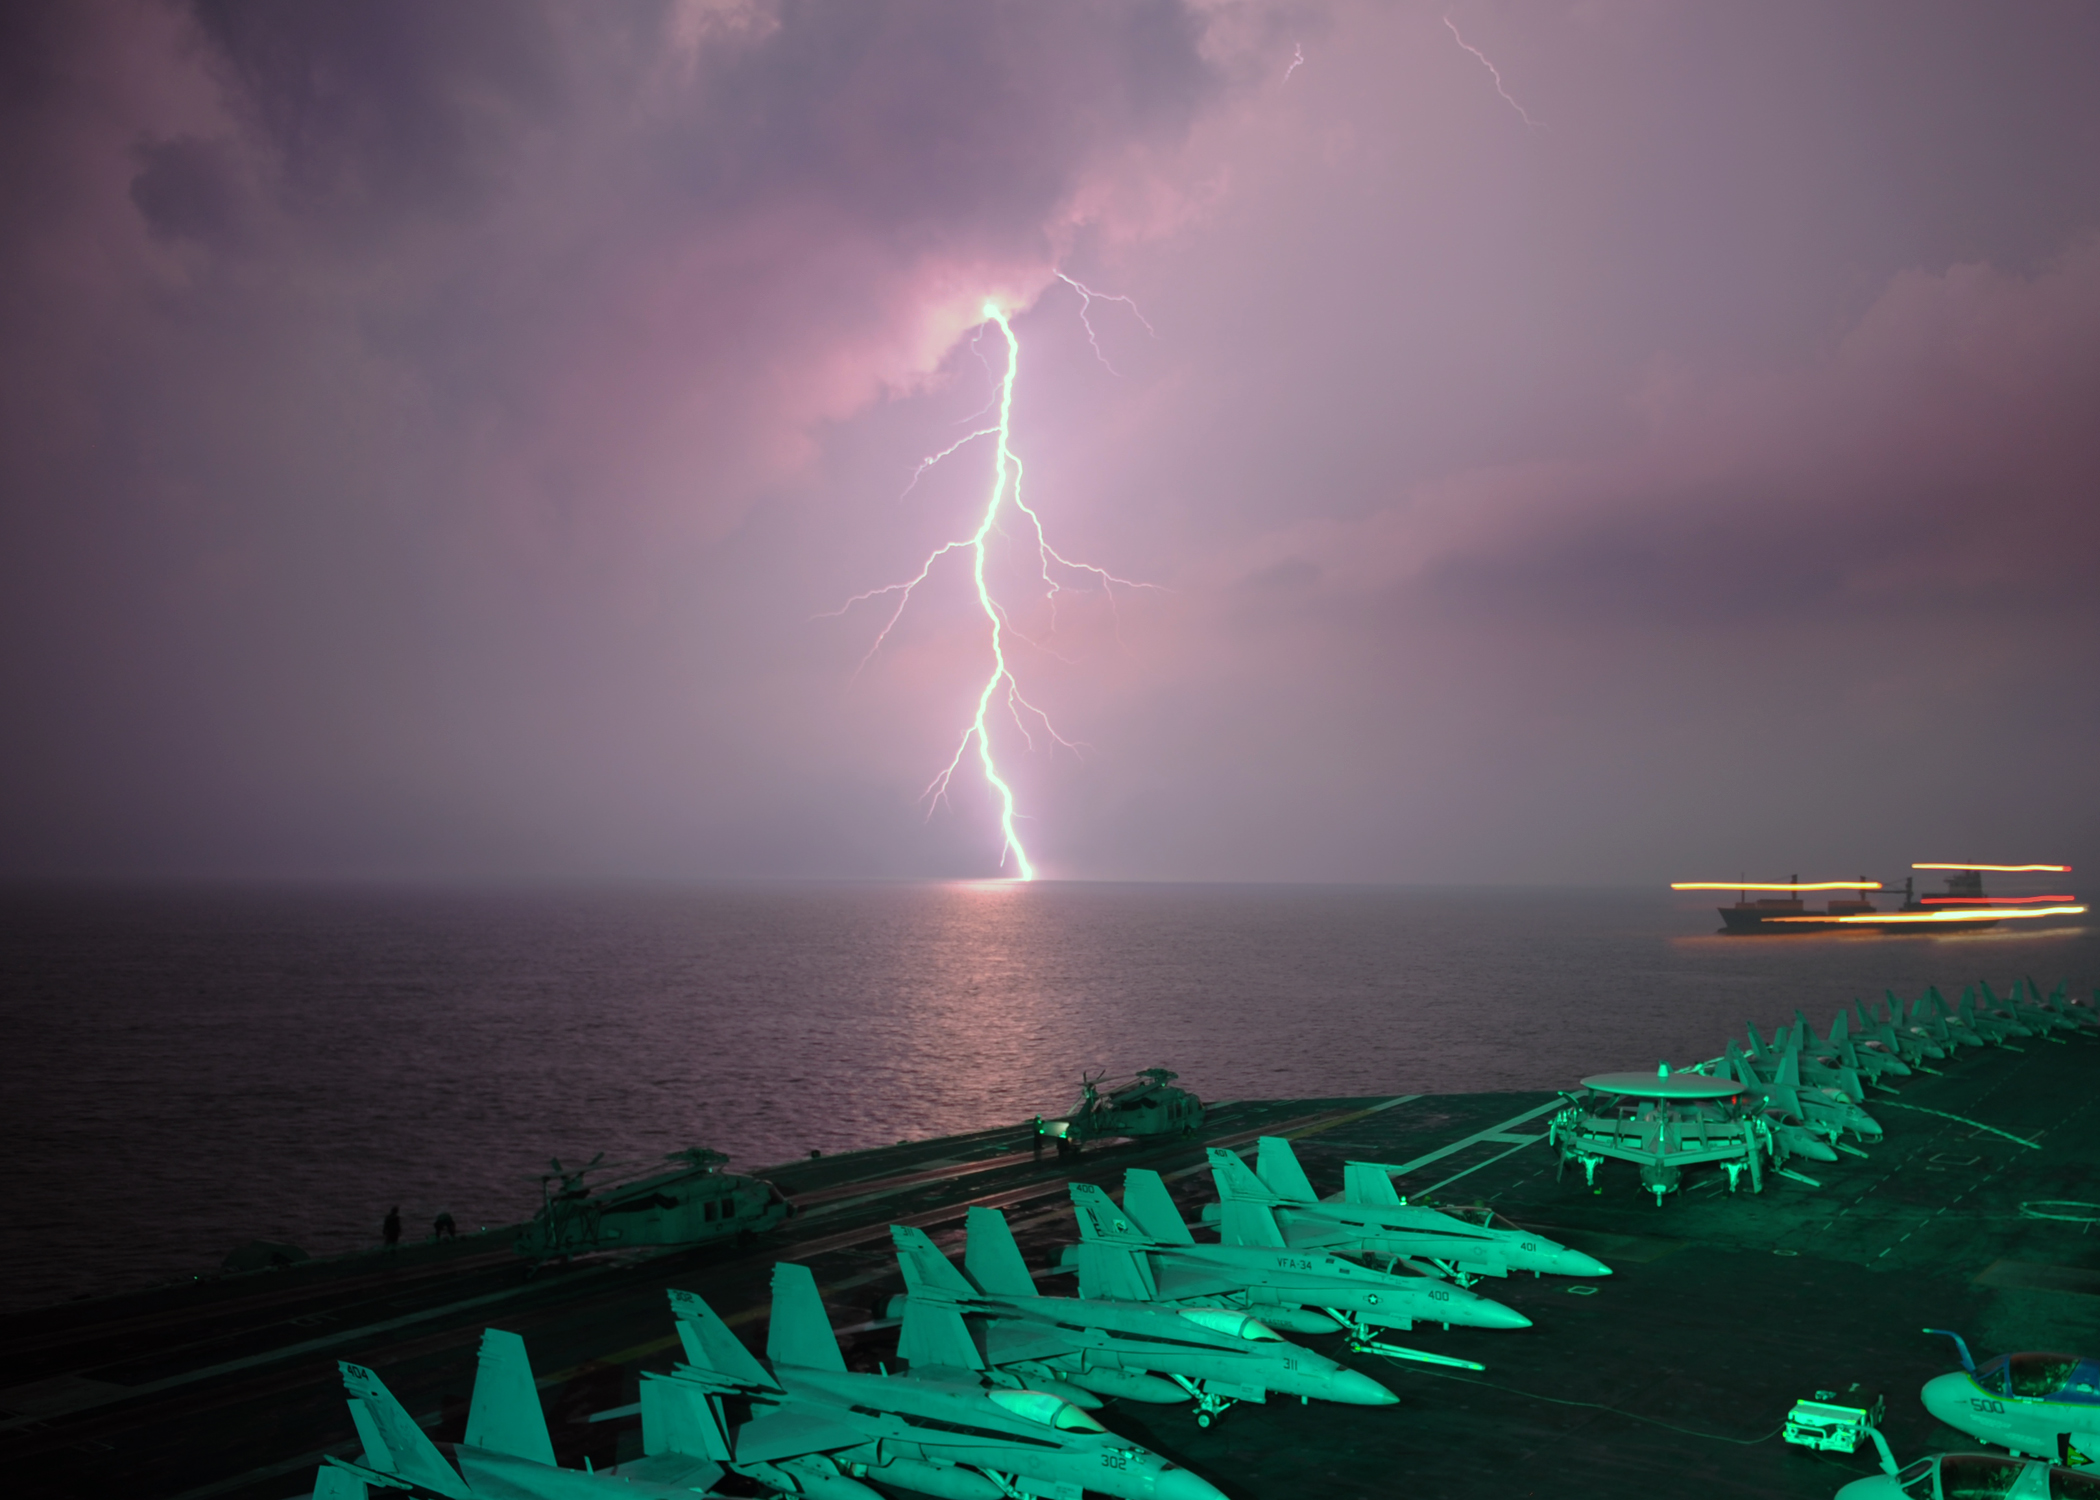 Lightning flashes in view of the aircraft carrier USS Abraham Lincoln (CVN-72)